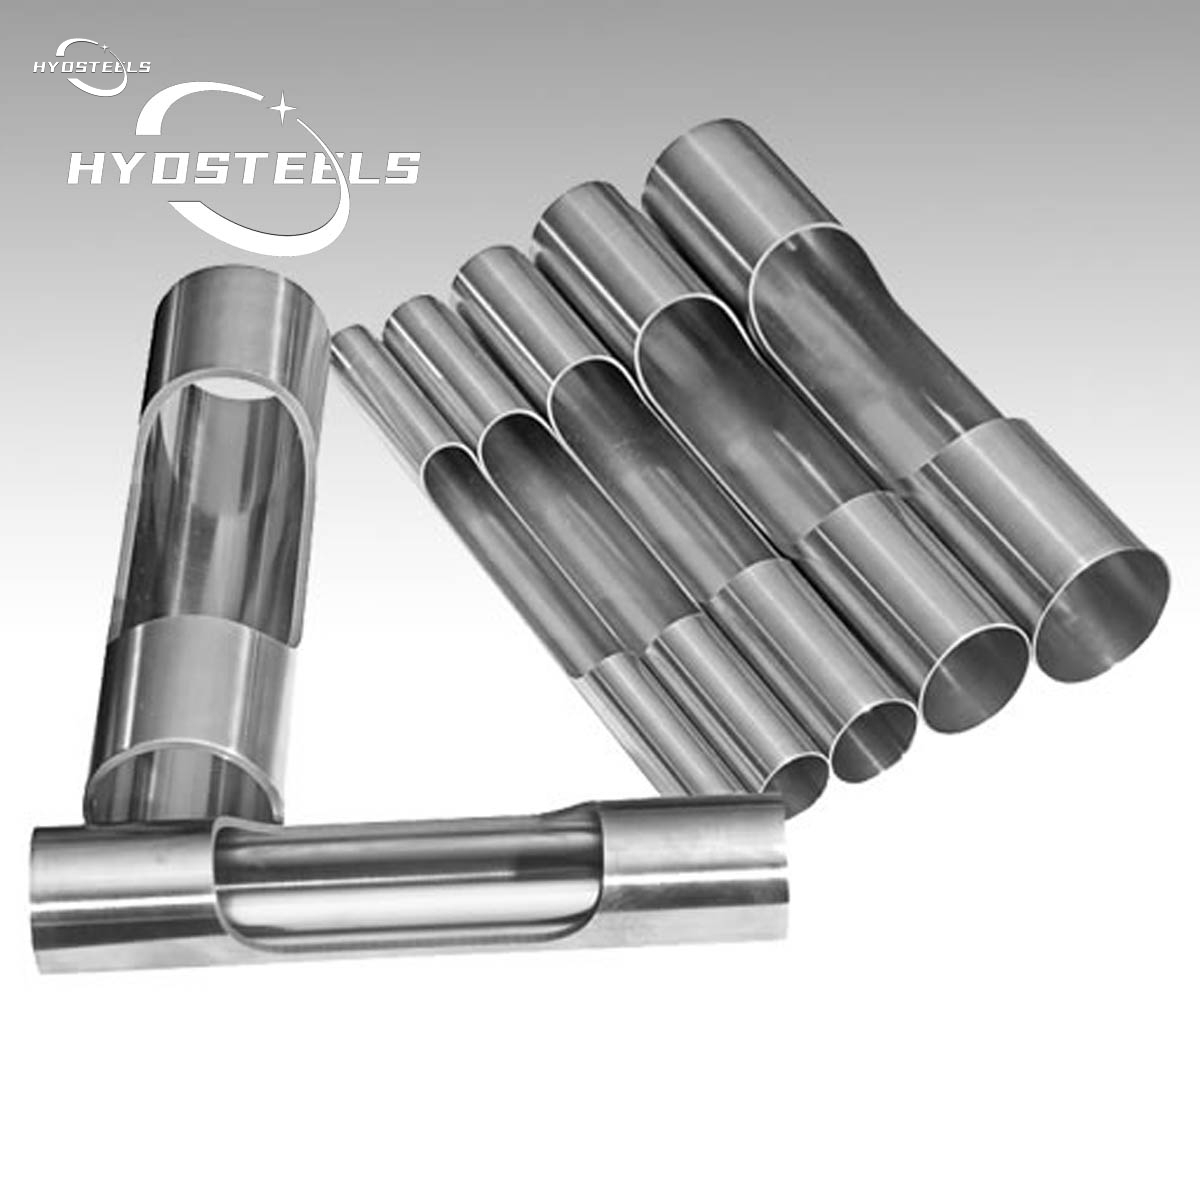 Honing Seamless Pipe Seamless Steel TubeS Manufacturers Supplier Company in China